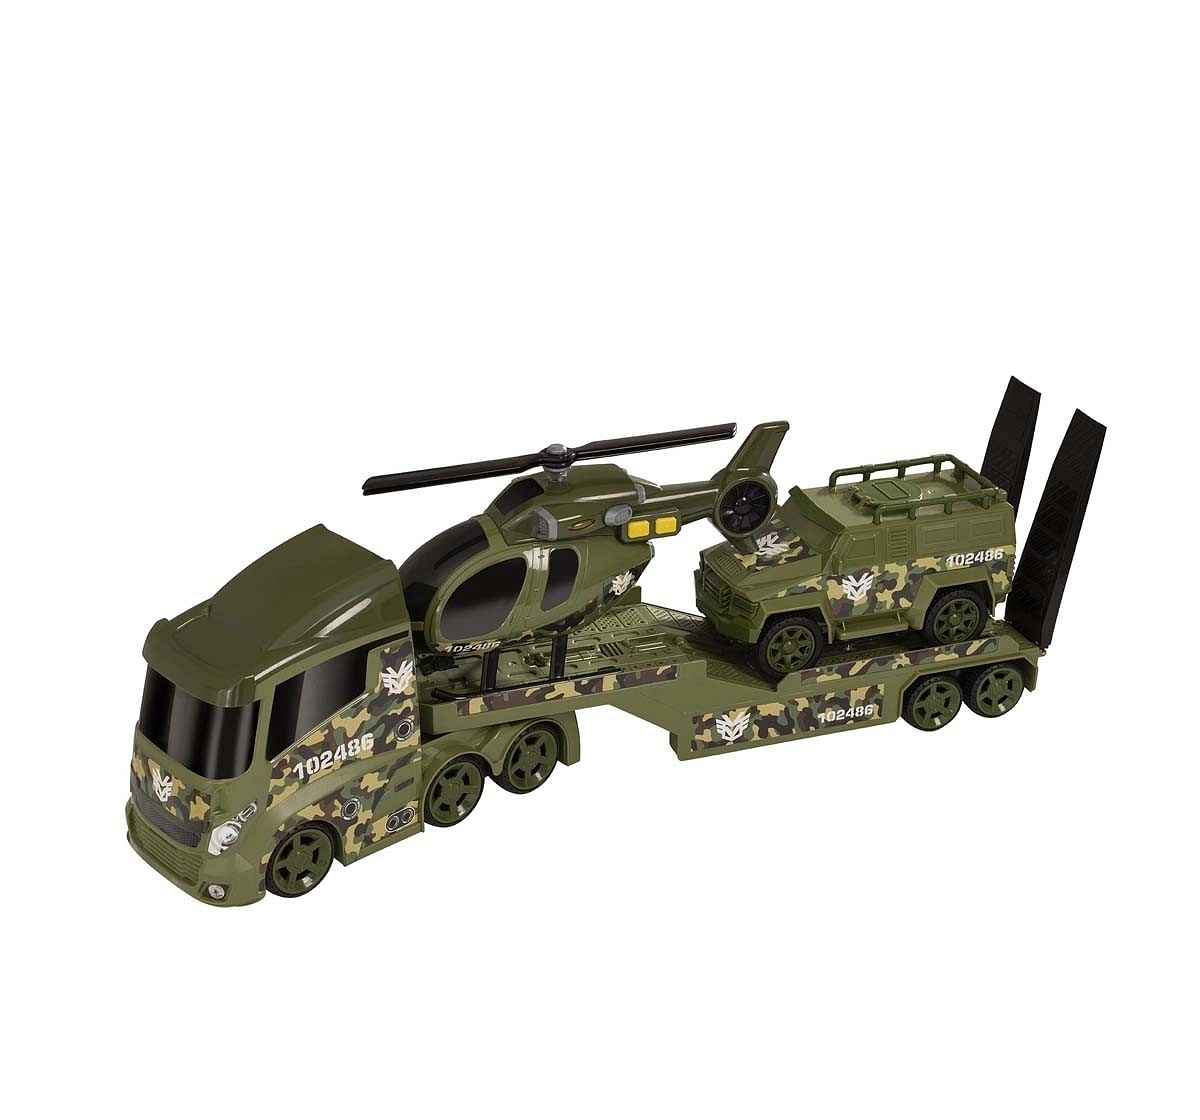 Teamsterz Light And Sound Military Transporter Vehicles for Kids Age 3Y+